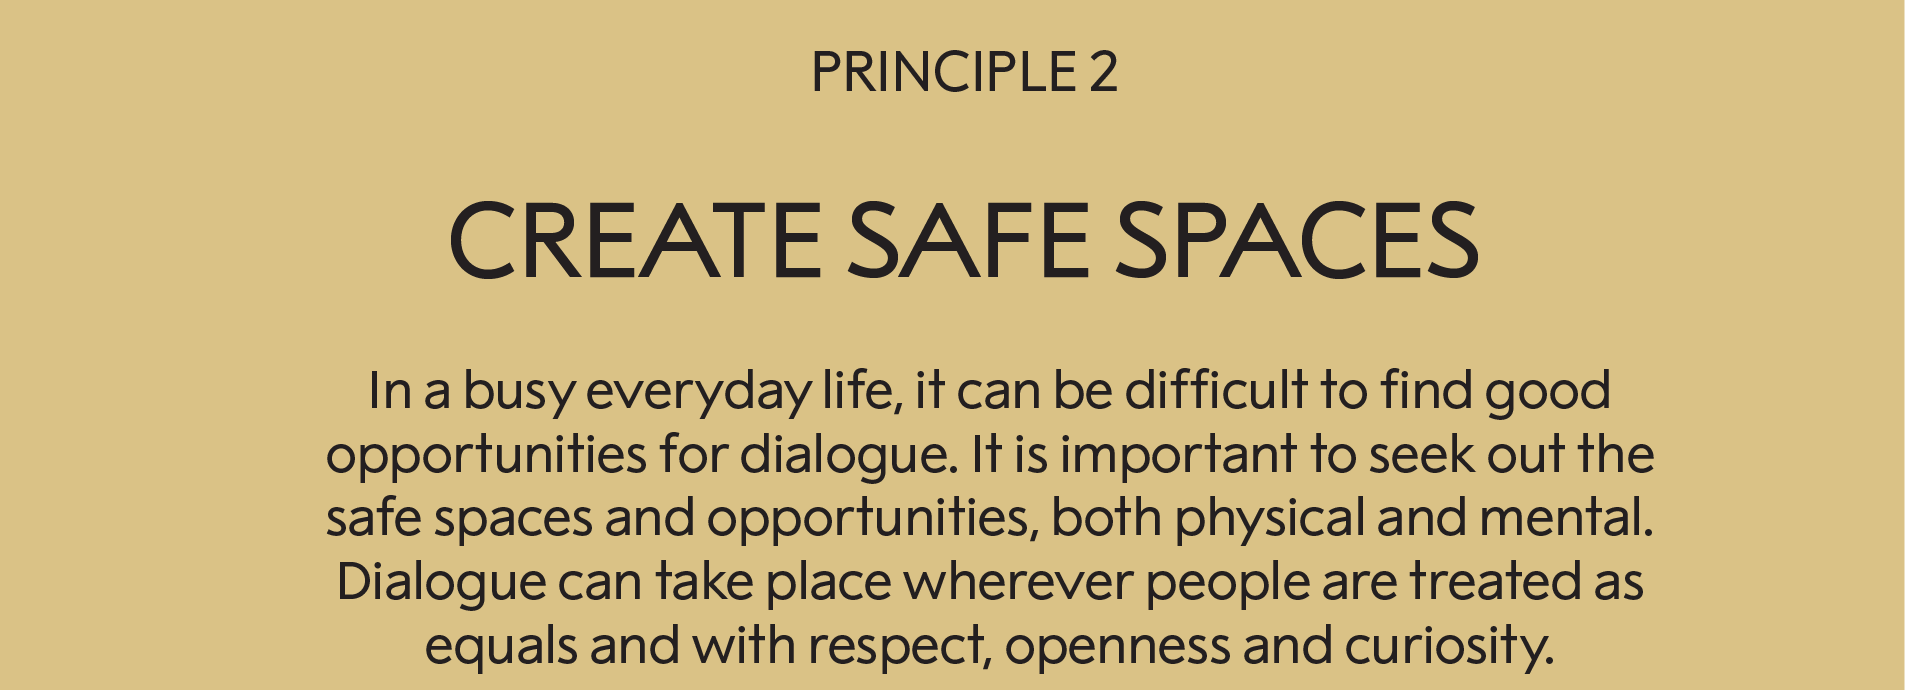 Principle 2: Create safe spaces :  In our busy everyday life, it can be difficult to find good opportunities for dialogue. It is important to seek out the safe spaces and opportunities, both physical and mental in nature. Dialogue can take place wherever people are treated as equals and with respect, openness and curiosity.     